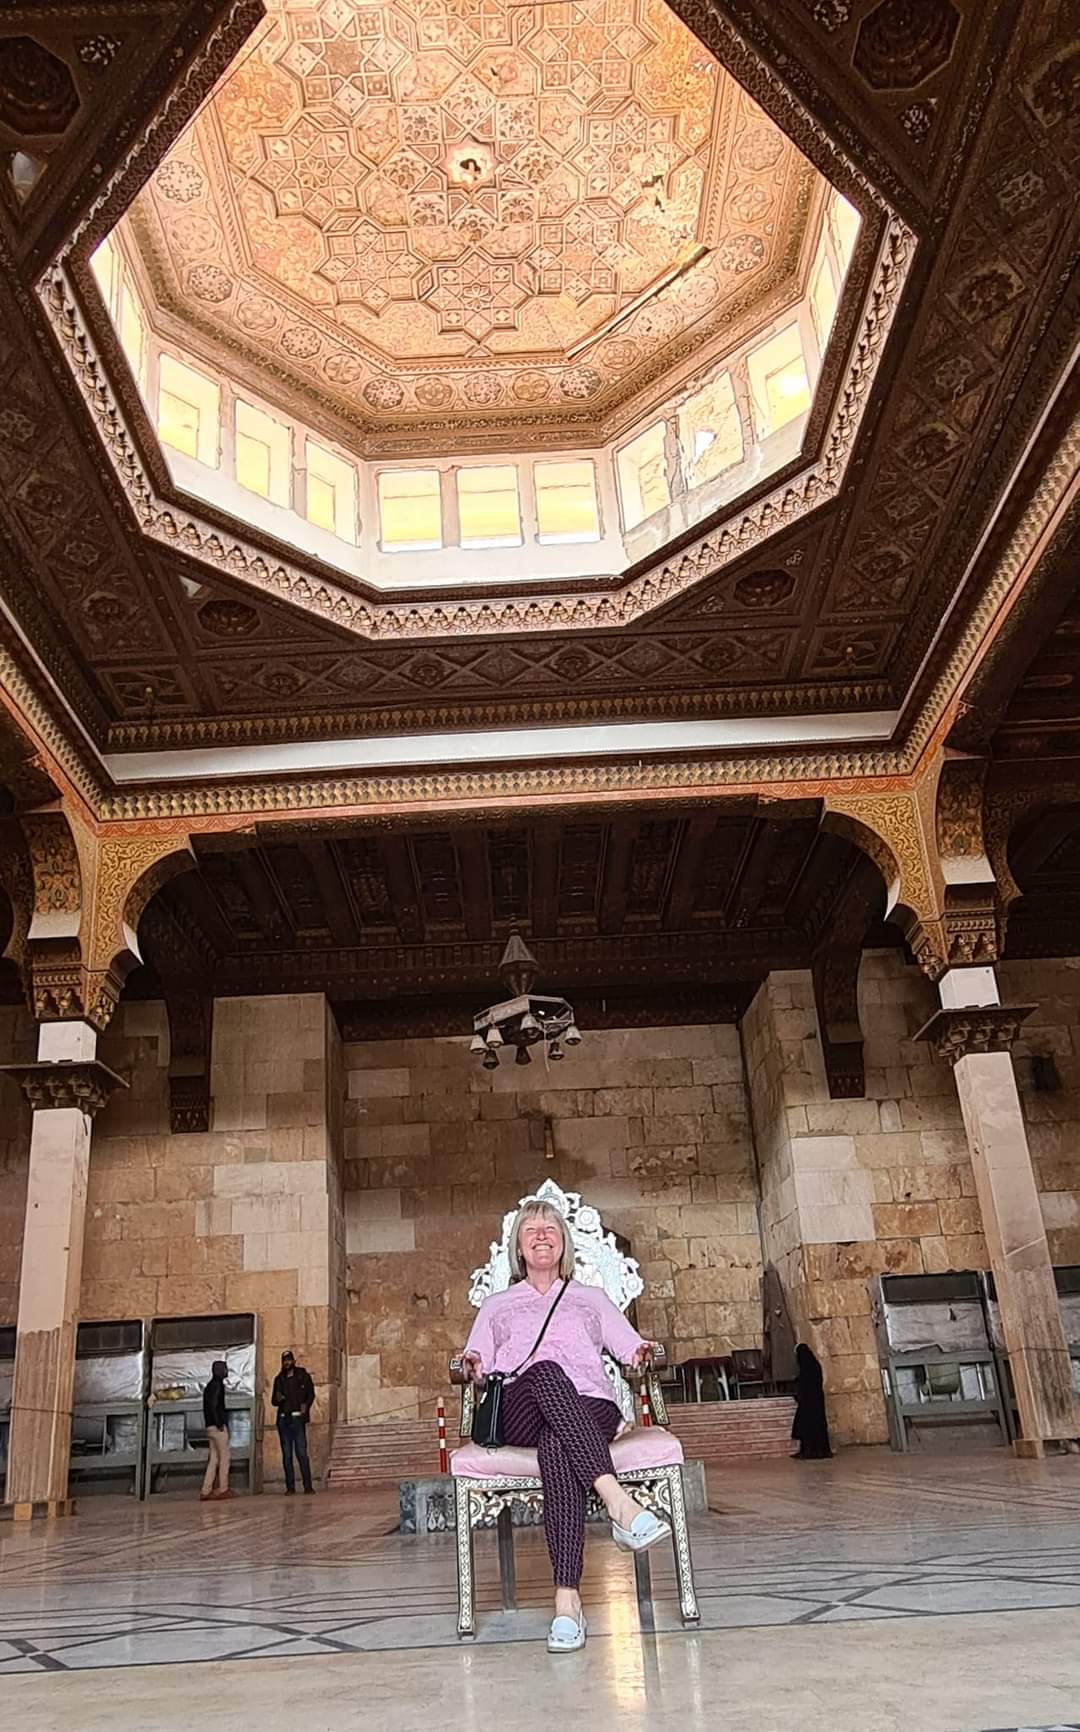 Me on the throne in the great hall at Aleppo citadel, Syria